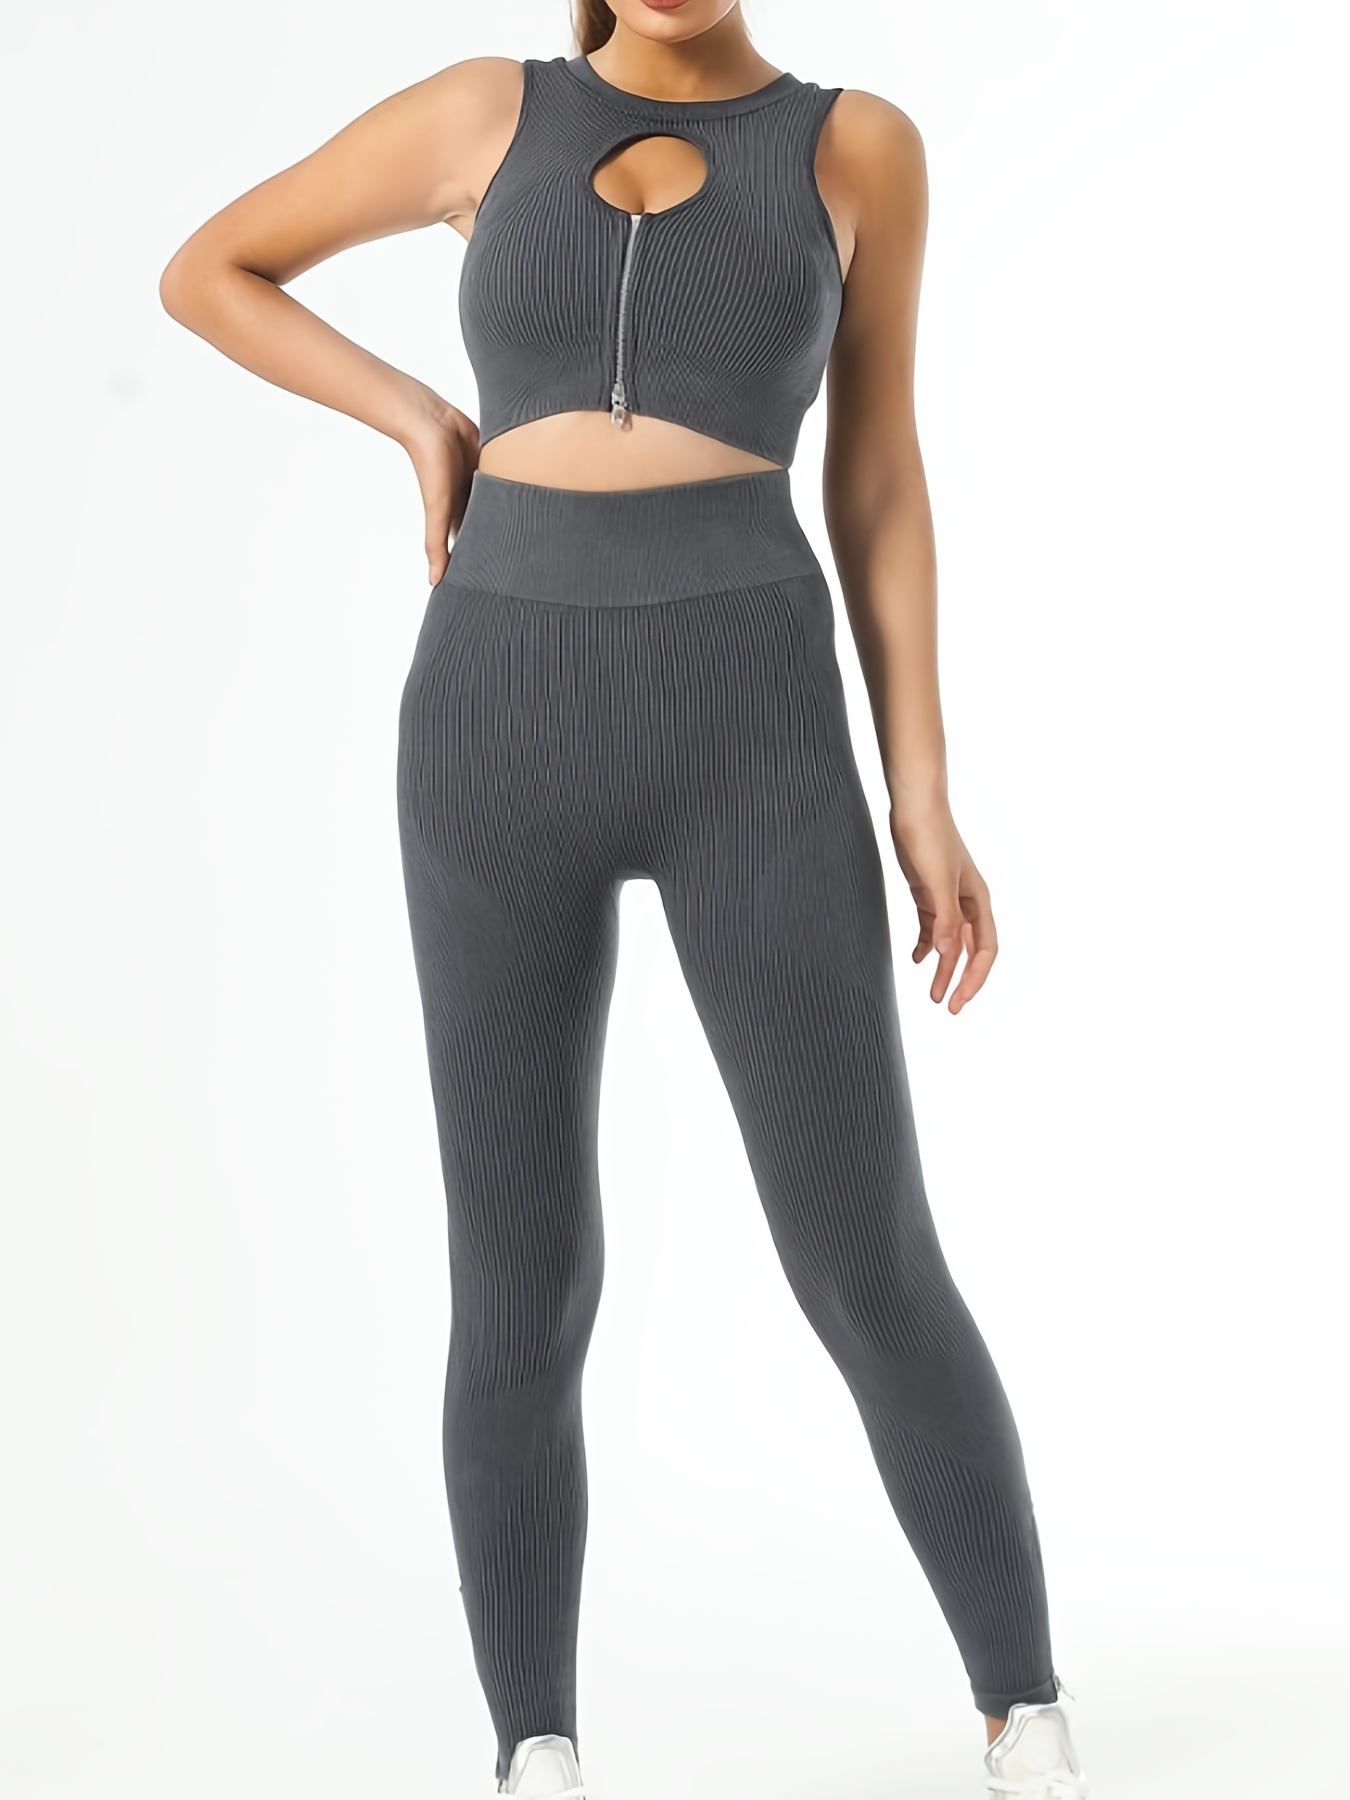 Womens Quick Drying Knit Yoga Workout Clothes Set Set With Bra And Leggings  Perfect For Exercise, Fitness, And Gym Workouts From Champselysees, $12.84